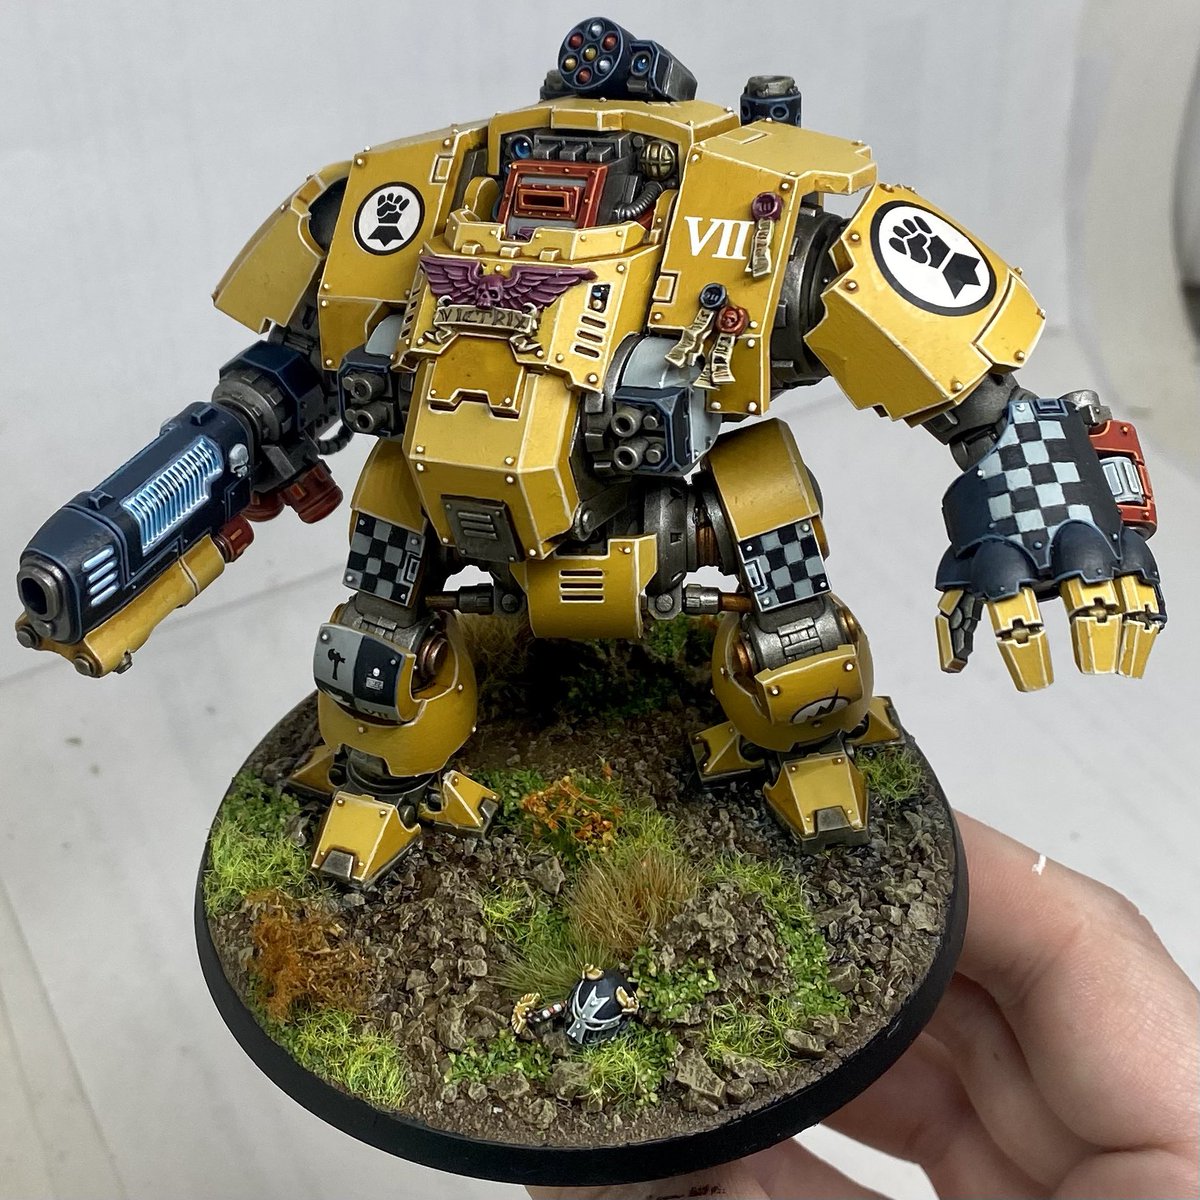 Is it weird that I quite enjoy painting yellow? Imperial Fists Redemptor…
#PaintingWarhammer #warhammer40k #WarhammerCommunity #Warmongers   #paintingminiatures #ImperialFists